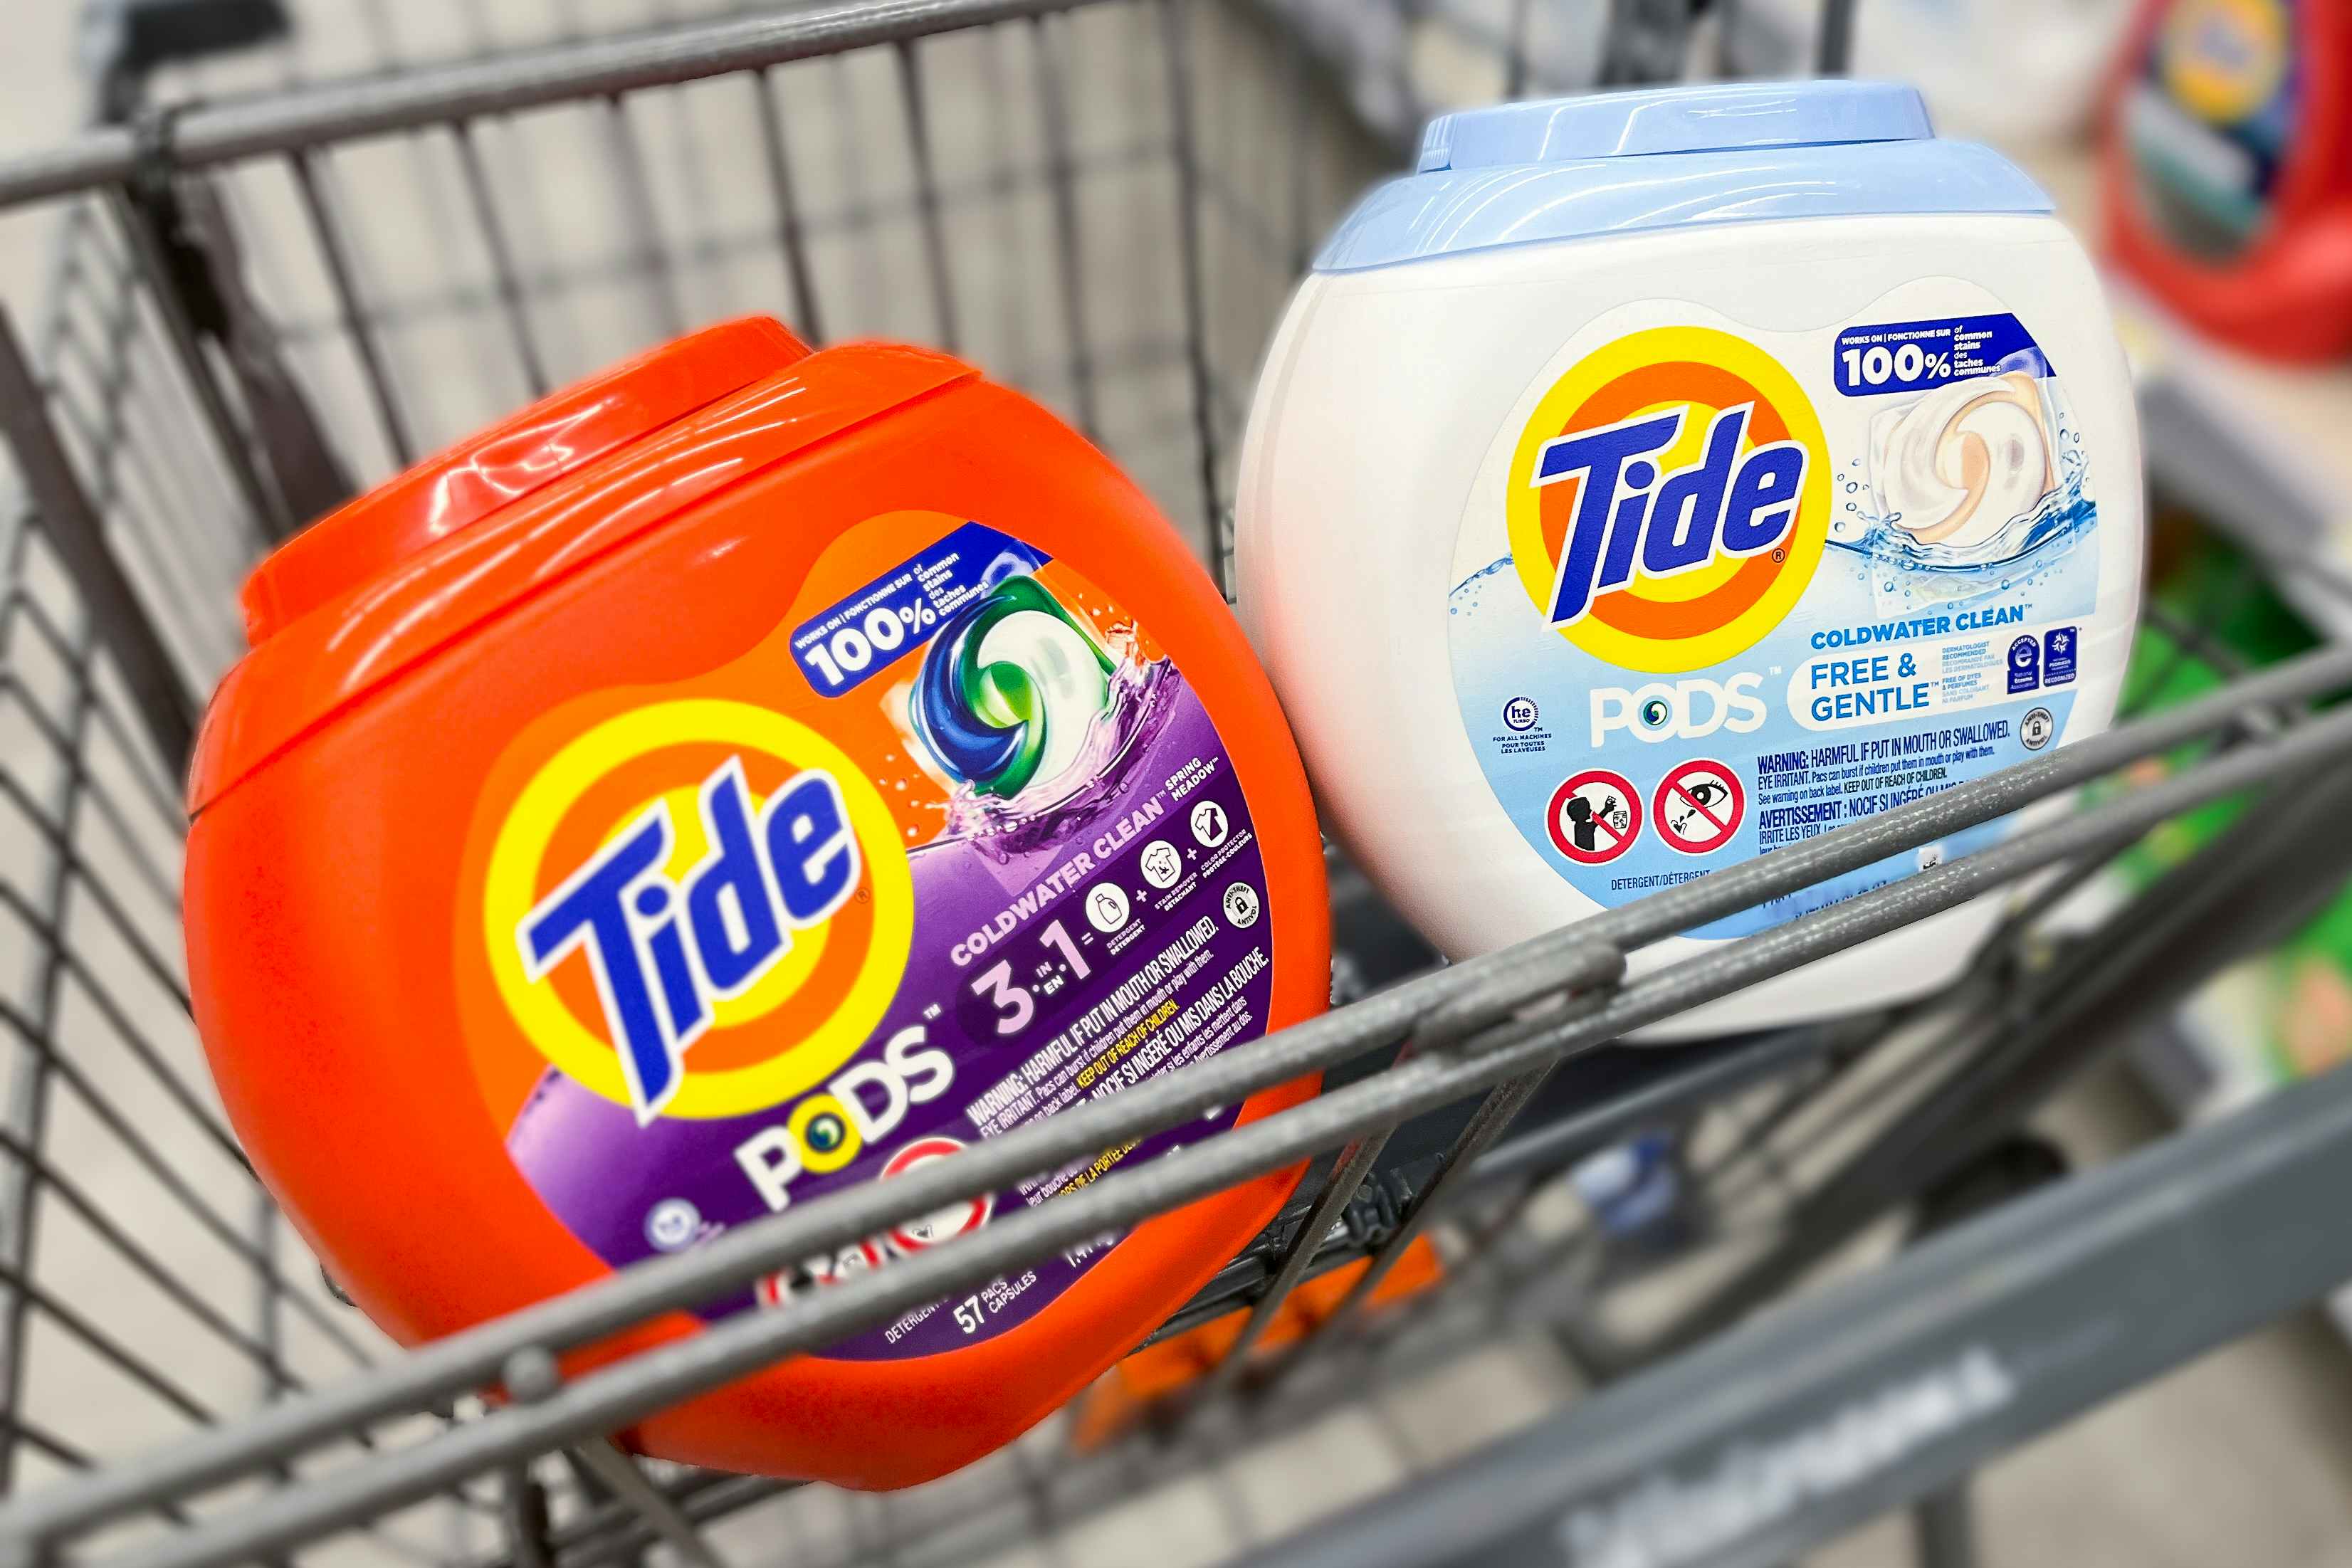 Tide Laundry Detergent (Large Sizes), as Low as $5.49 Each at Walgreens